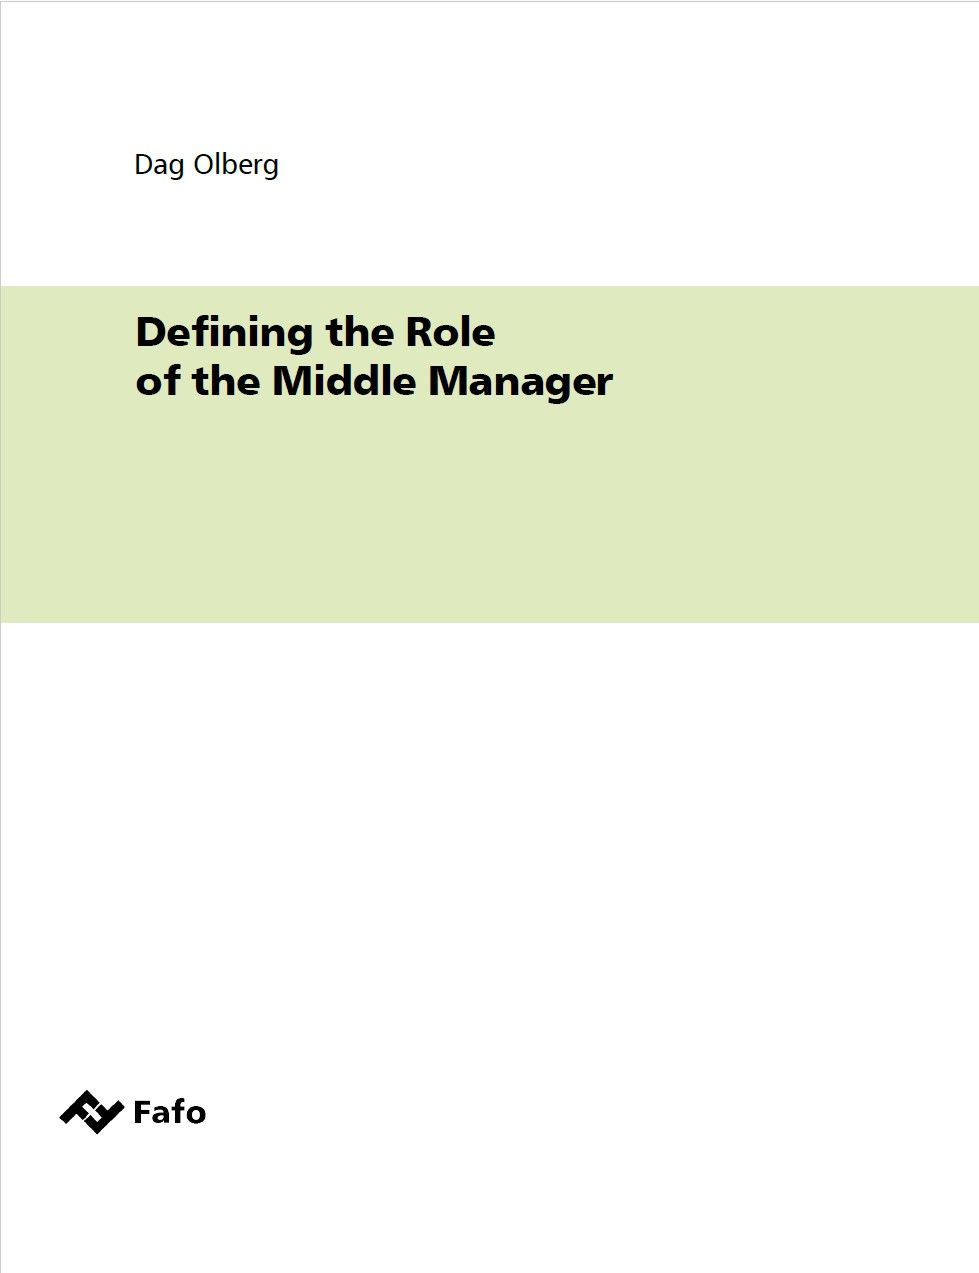 Defining the Role of the Middle Manager